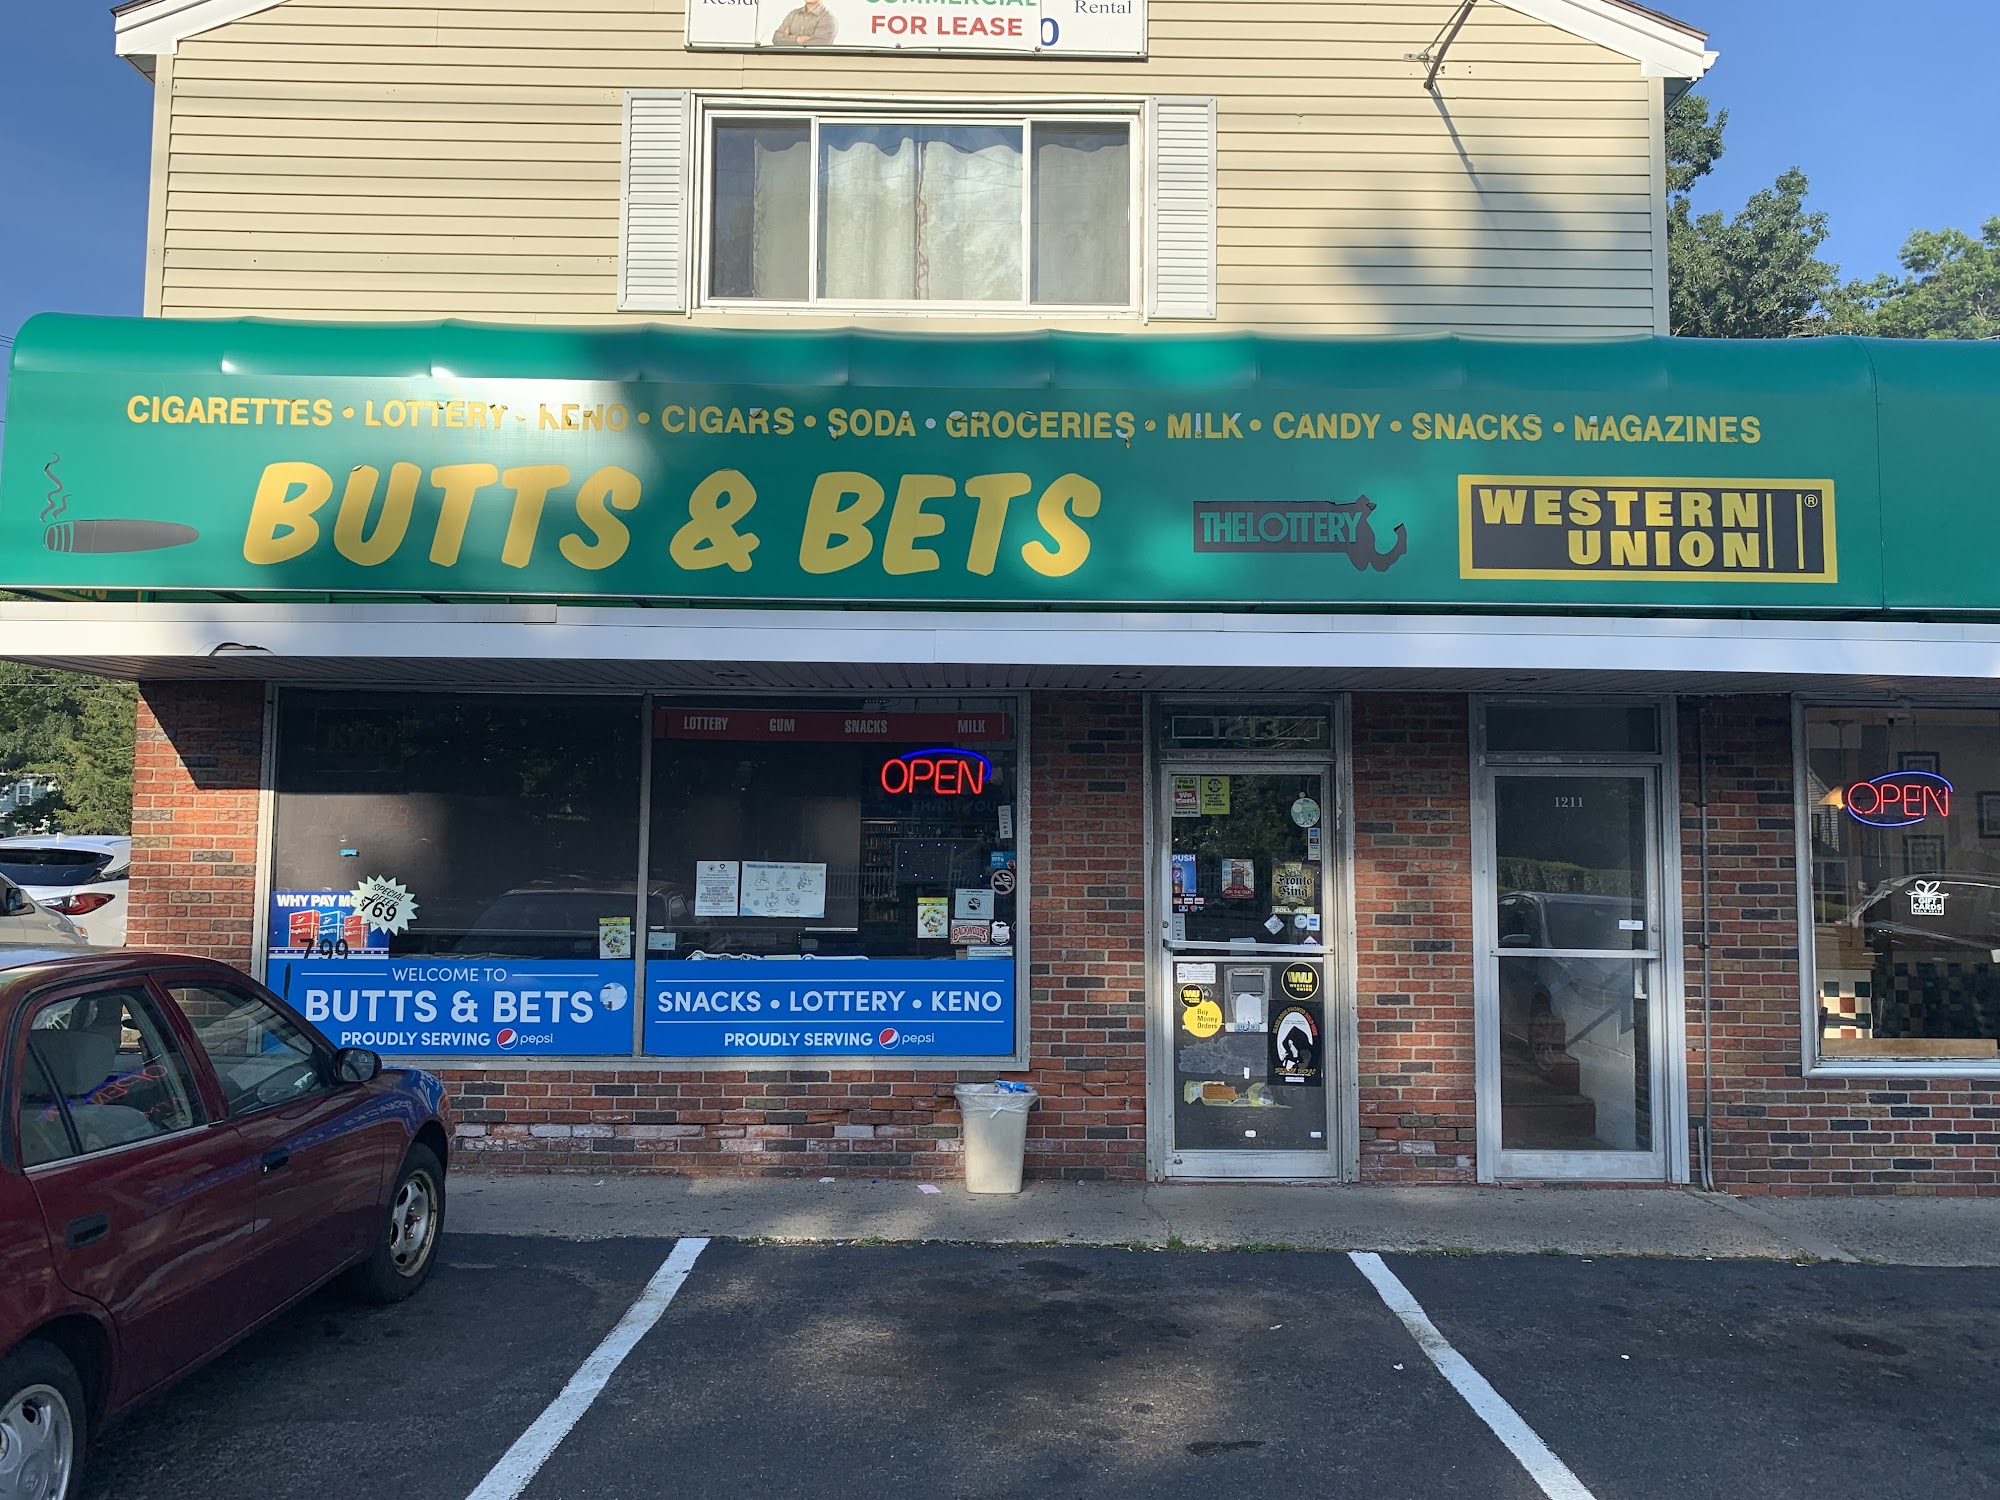 Butts & Bets